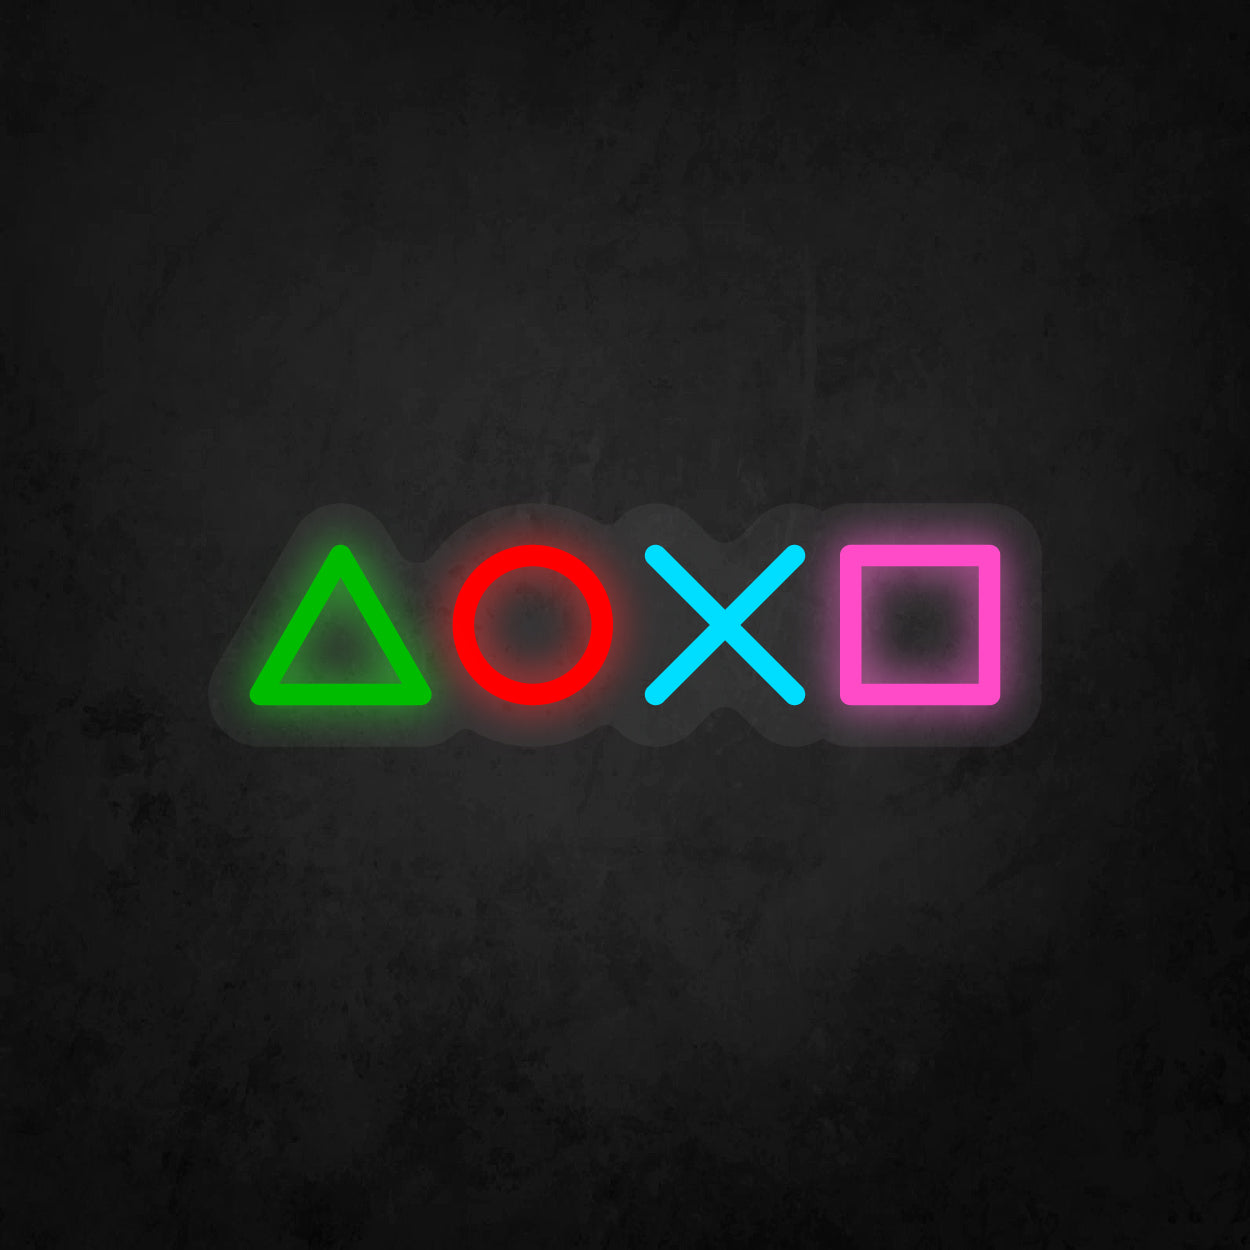 LED Neon Sign - PlayStation Button